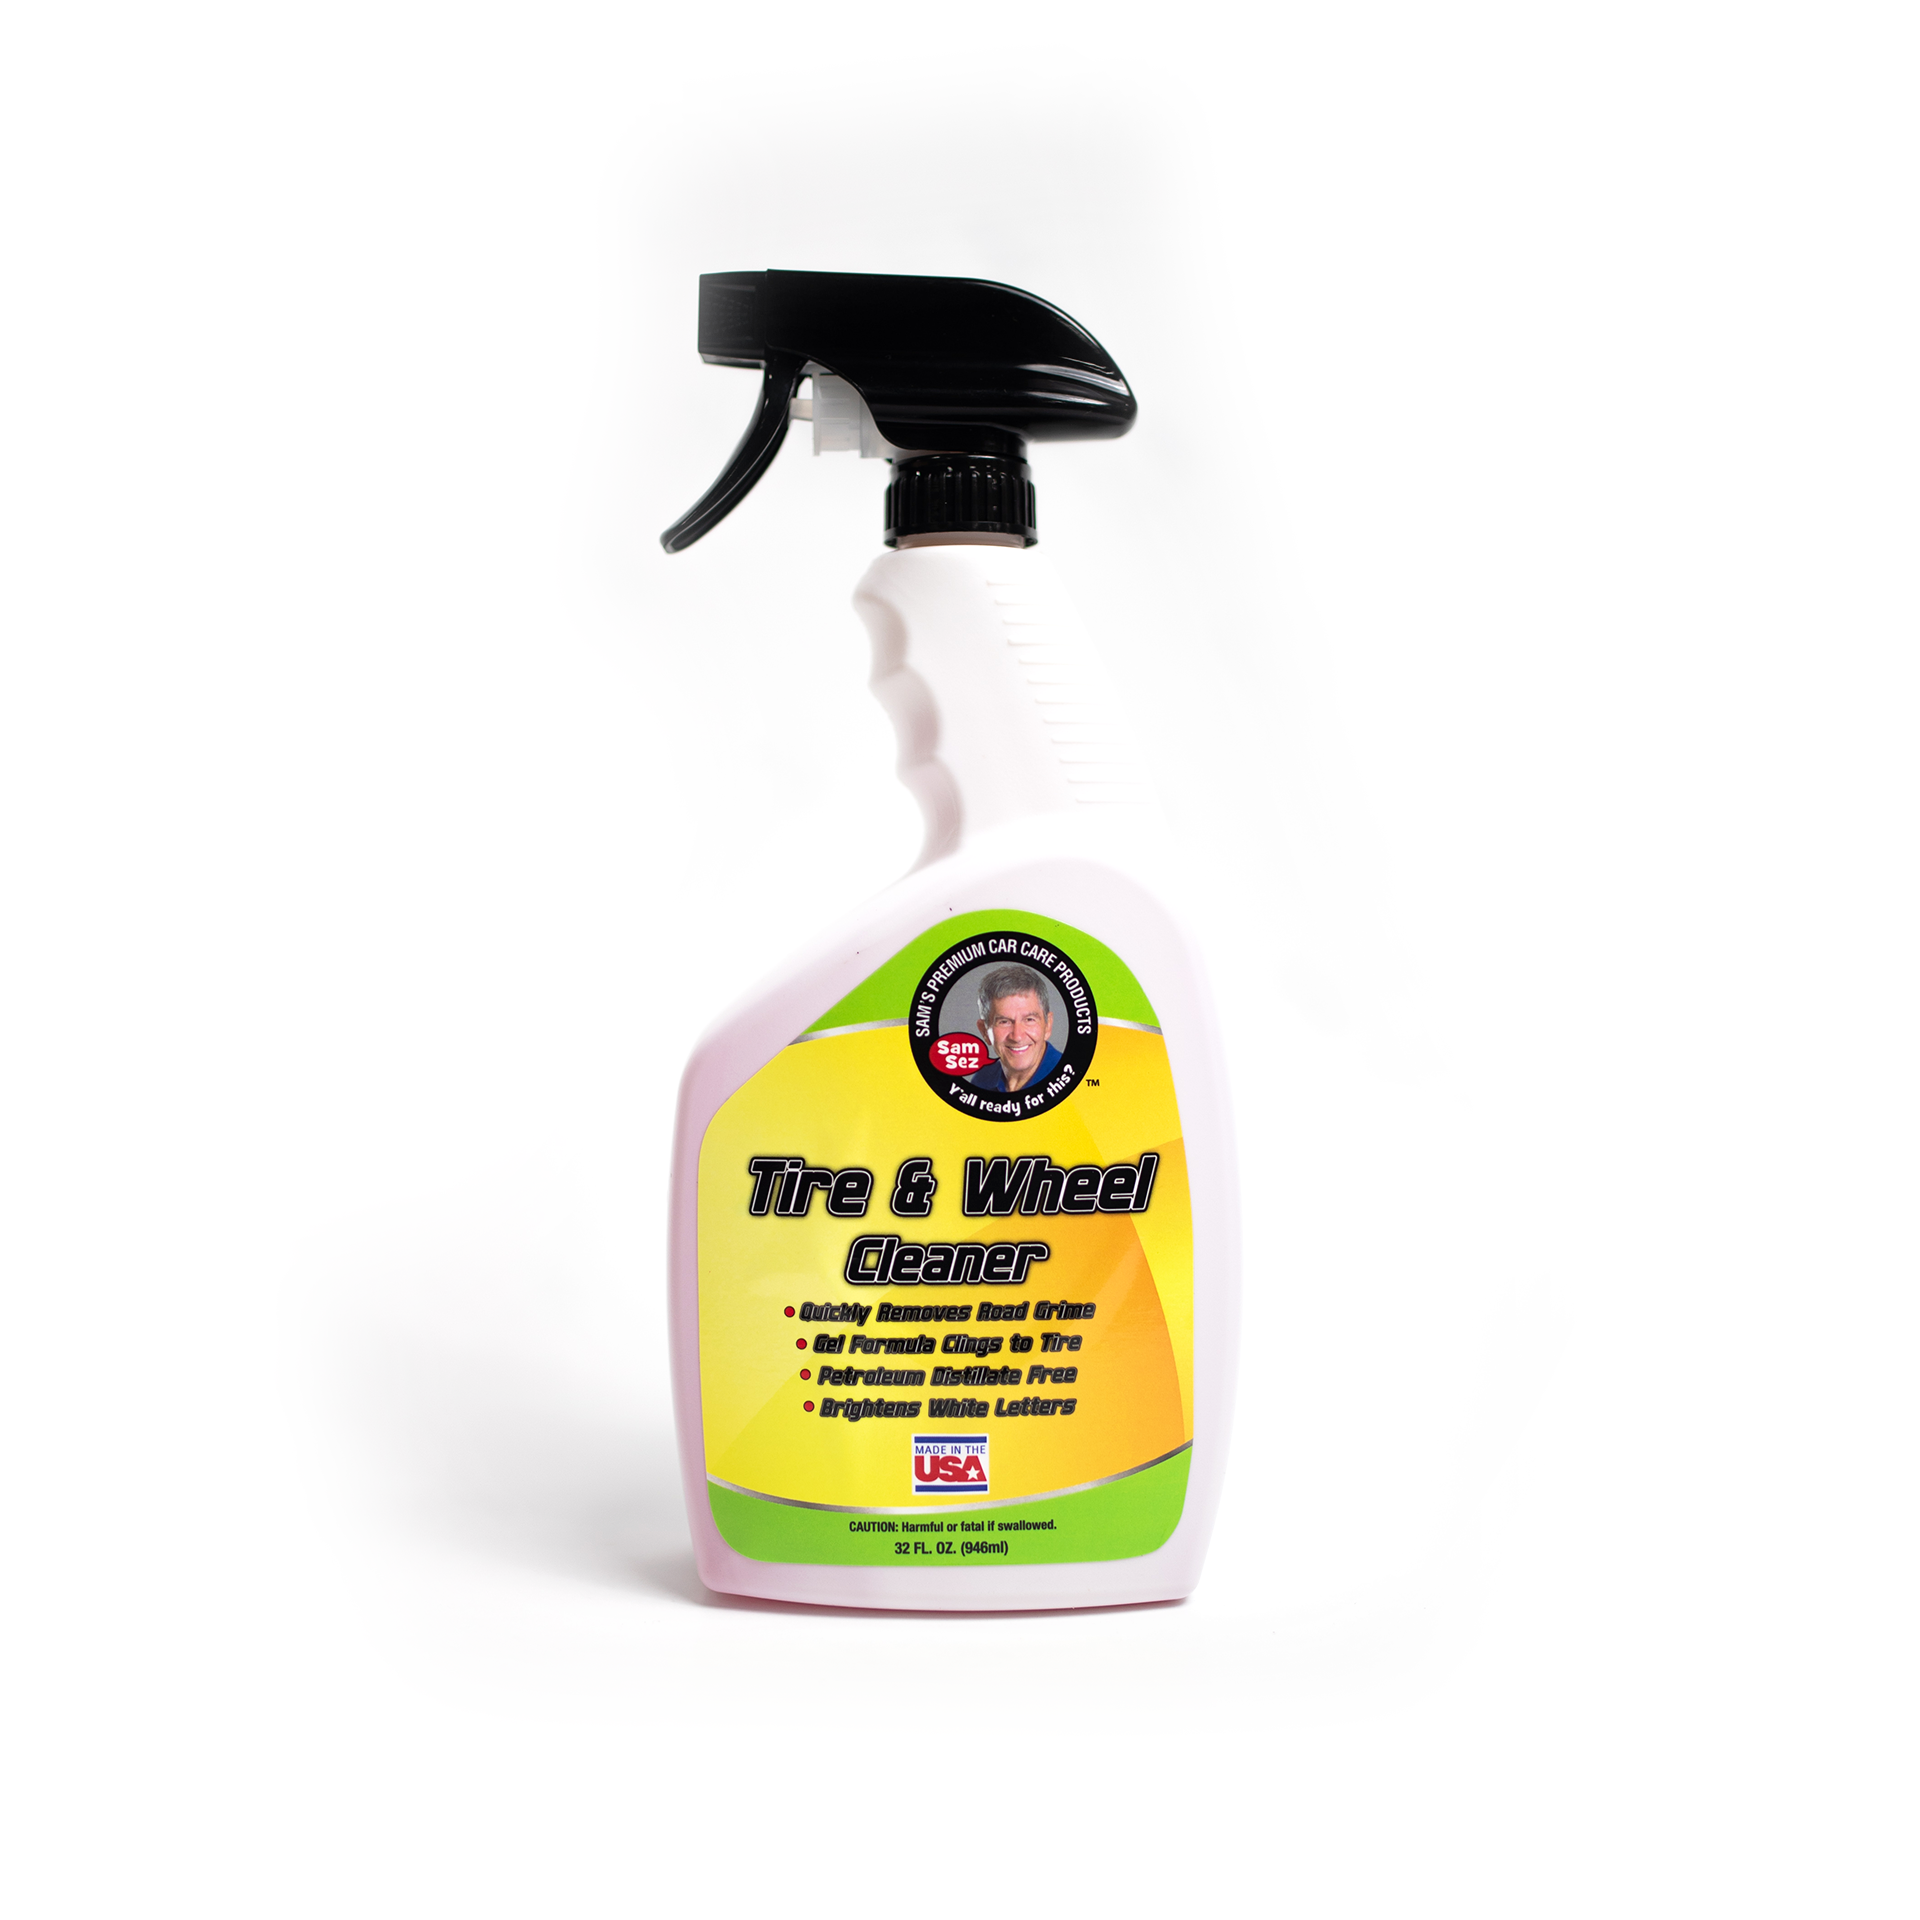 MR Direct 1-fl oz Stainless Steel Cleaner at